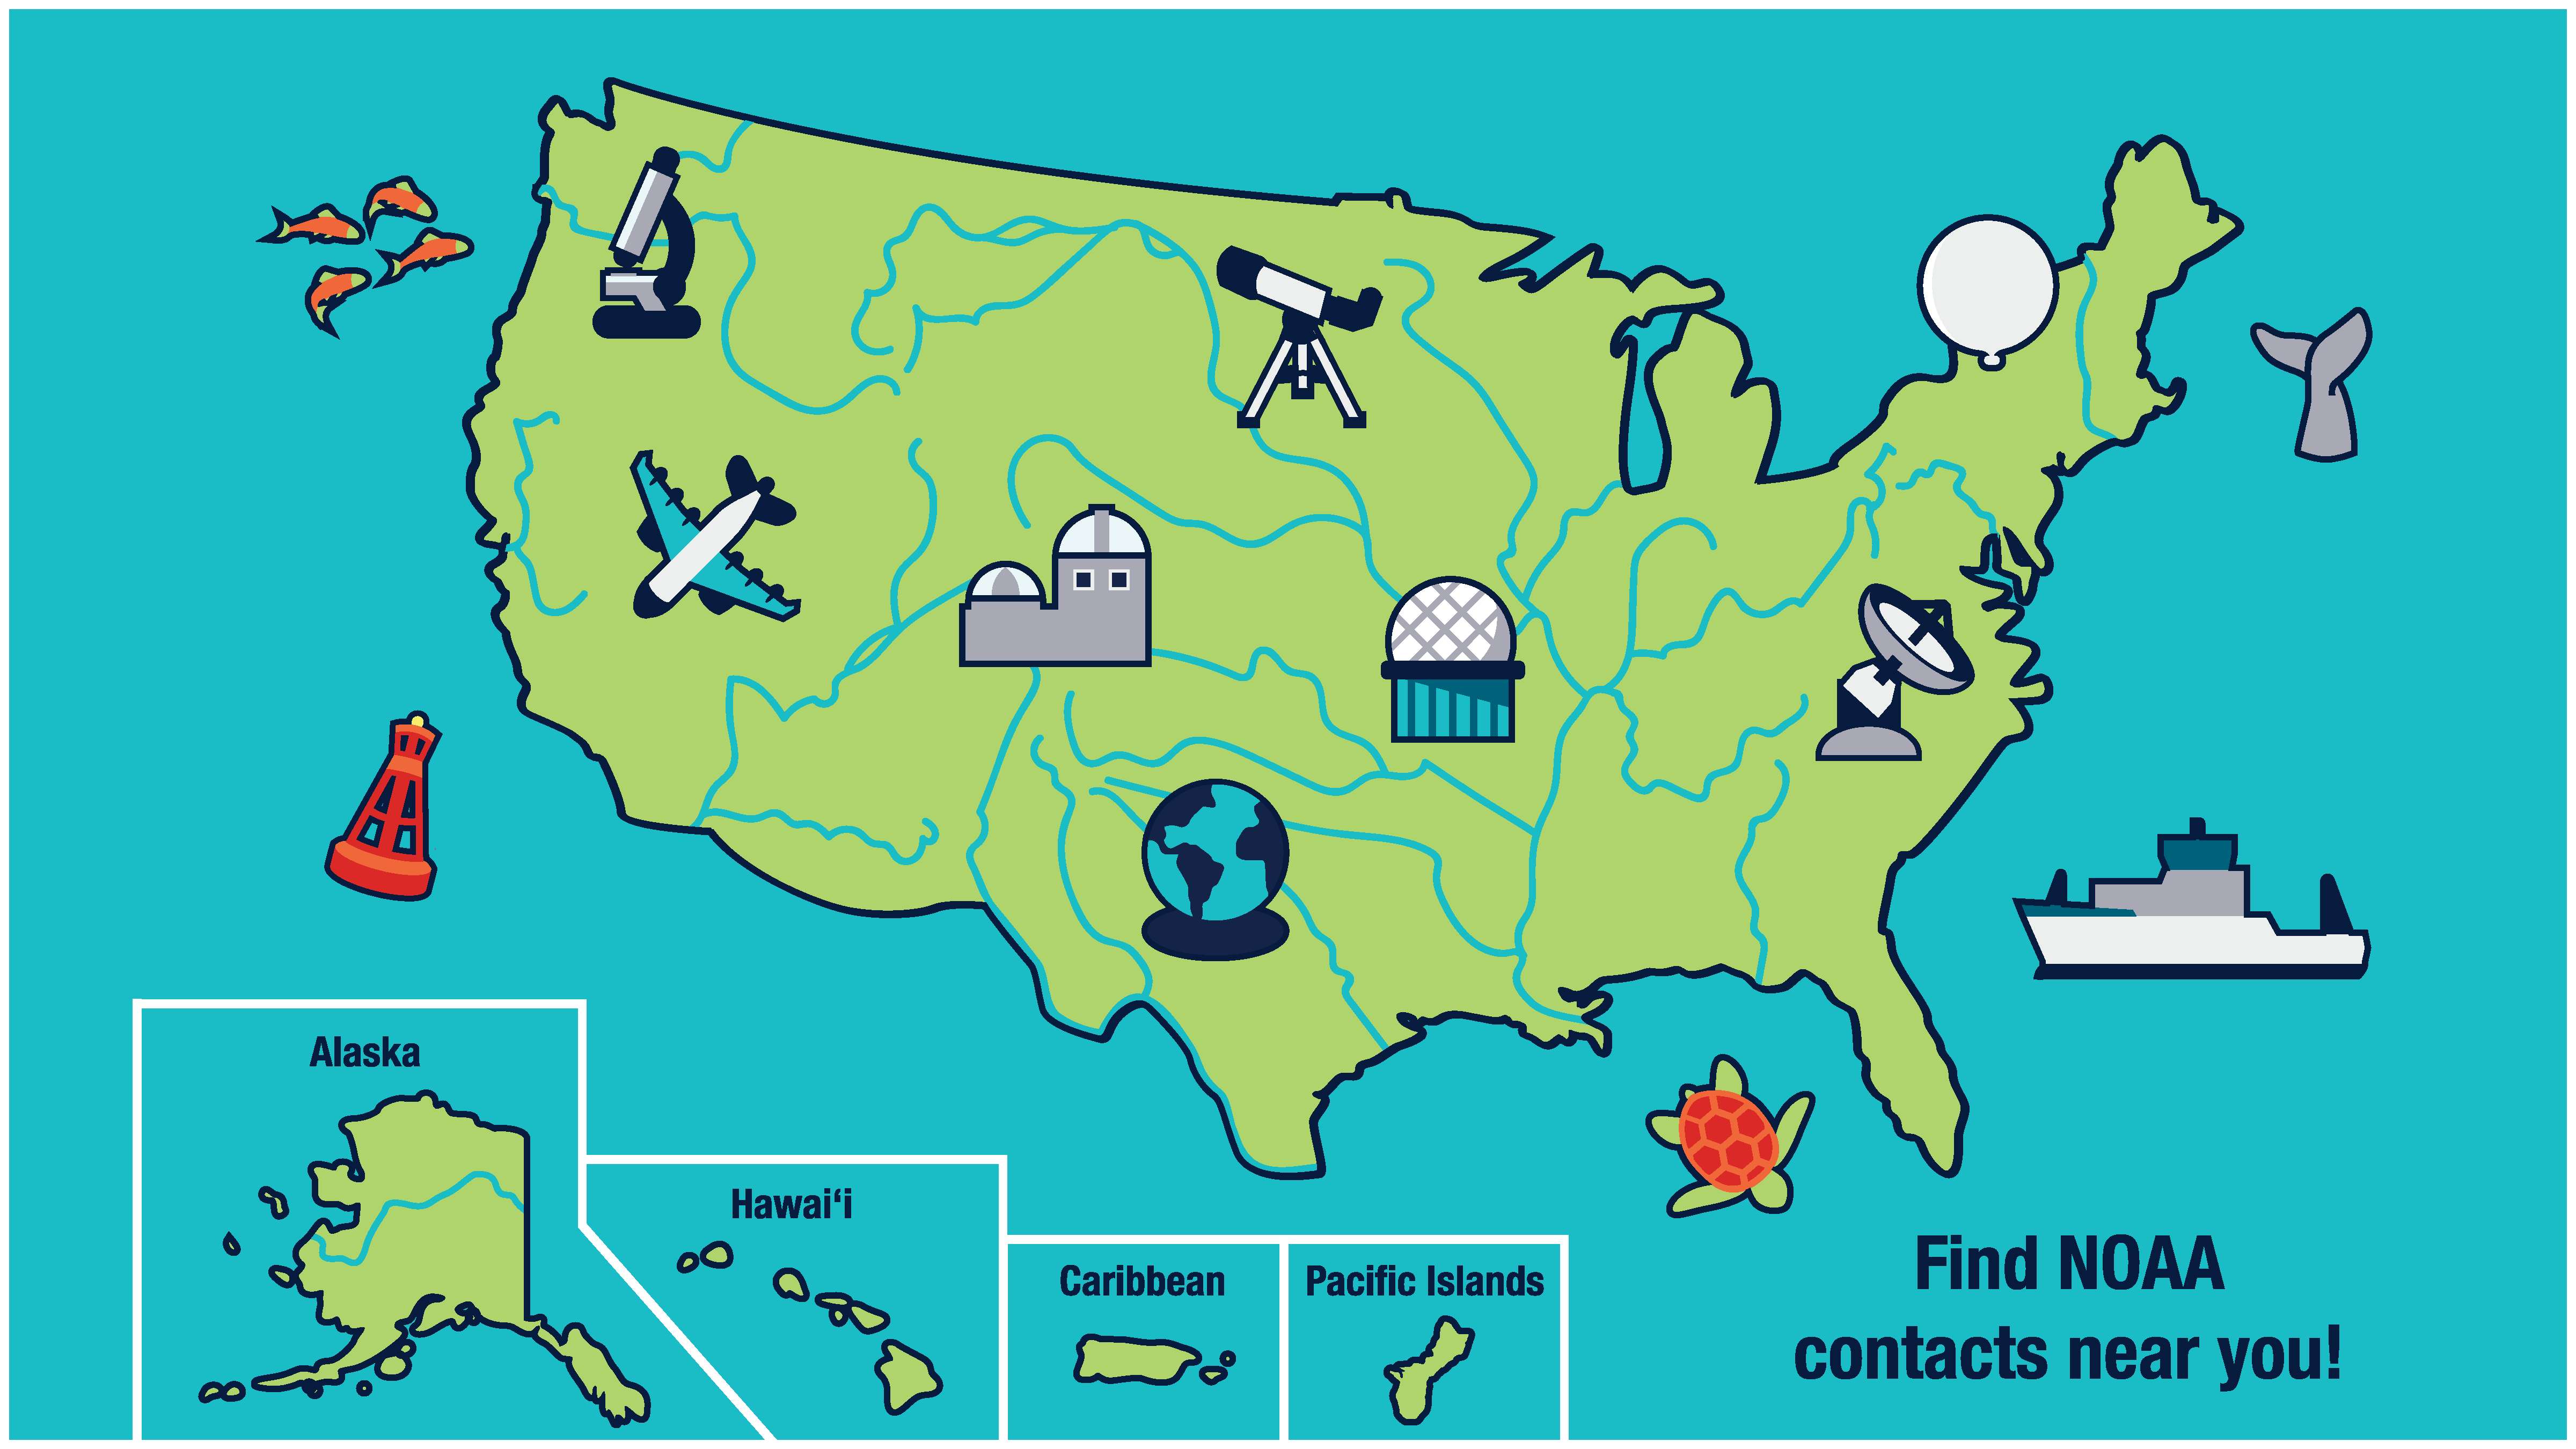 Postcard graphic with map showing NOAA-related icons including satellites, research vessels, fisheries, Science on a Sphere, and more symbolizing NOAA facilities and professional communicators across all 50 United States, Washington, D.C., and the U.S. territories. Find NOAA contacts near you at https://www.noaa.gov/education/noaa-in-your-backyard.